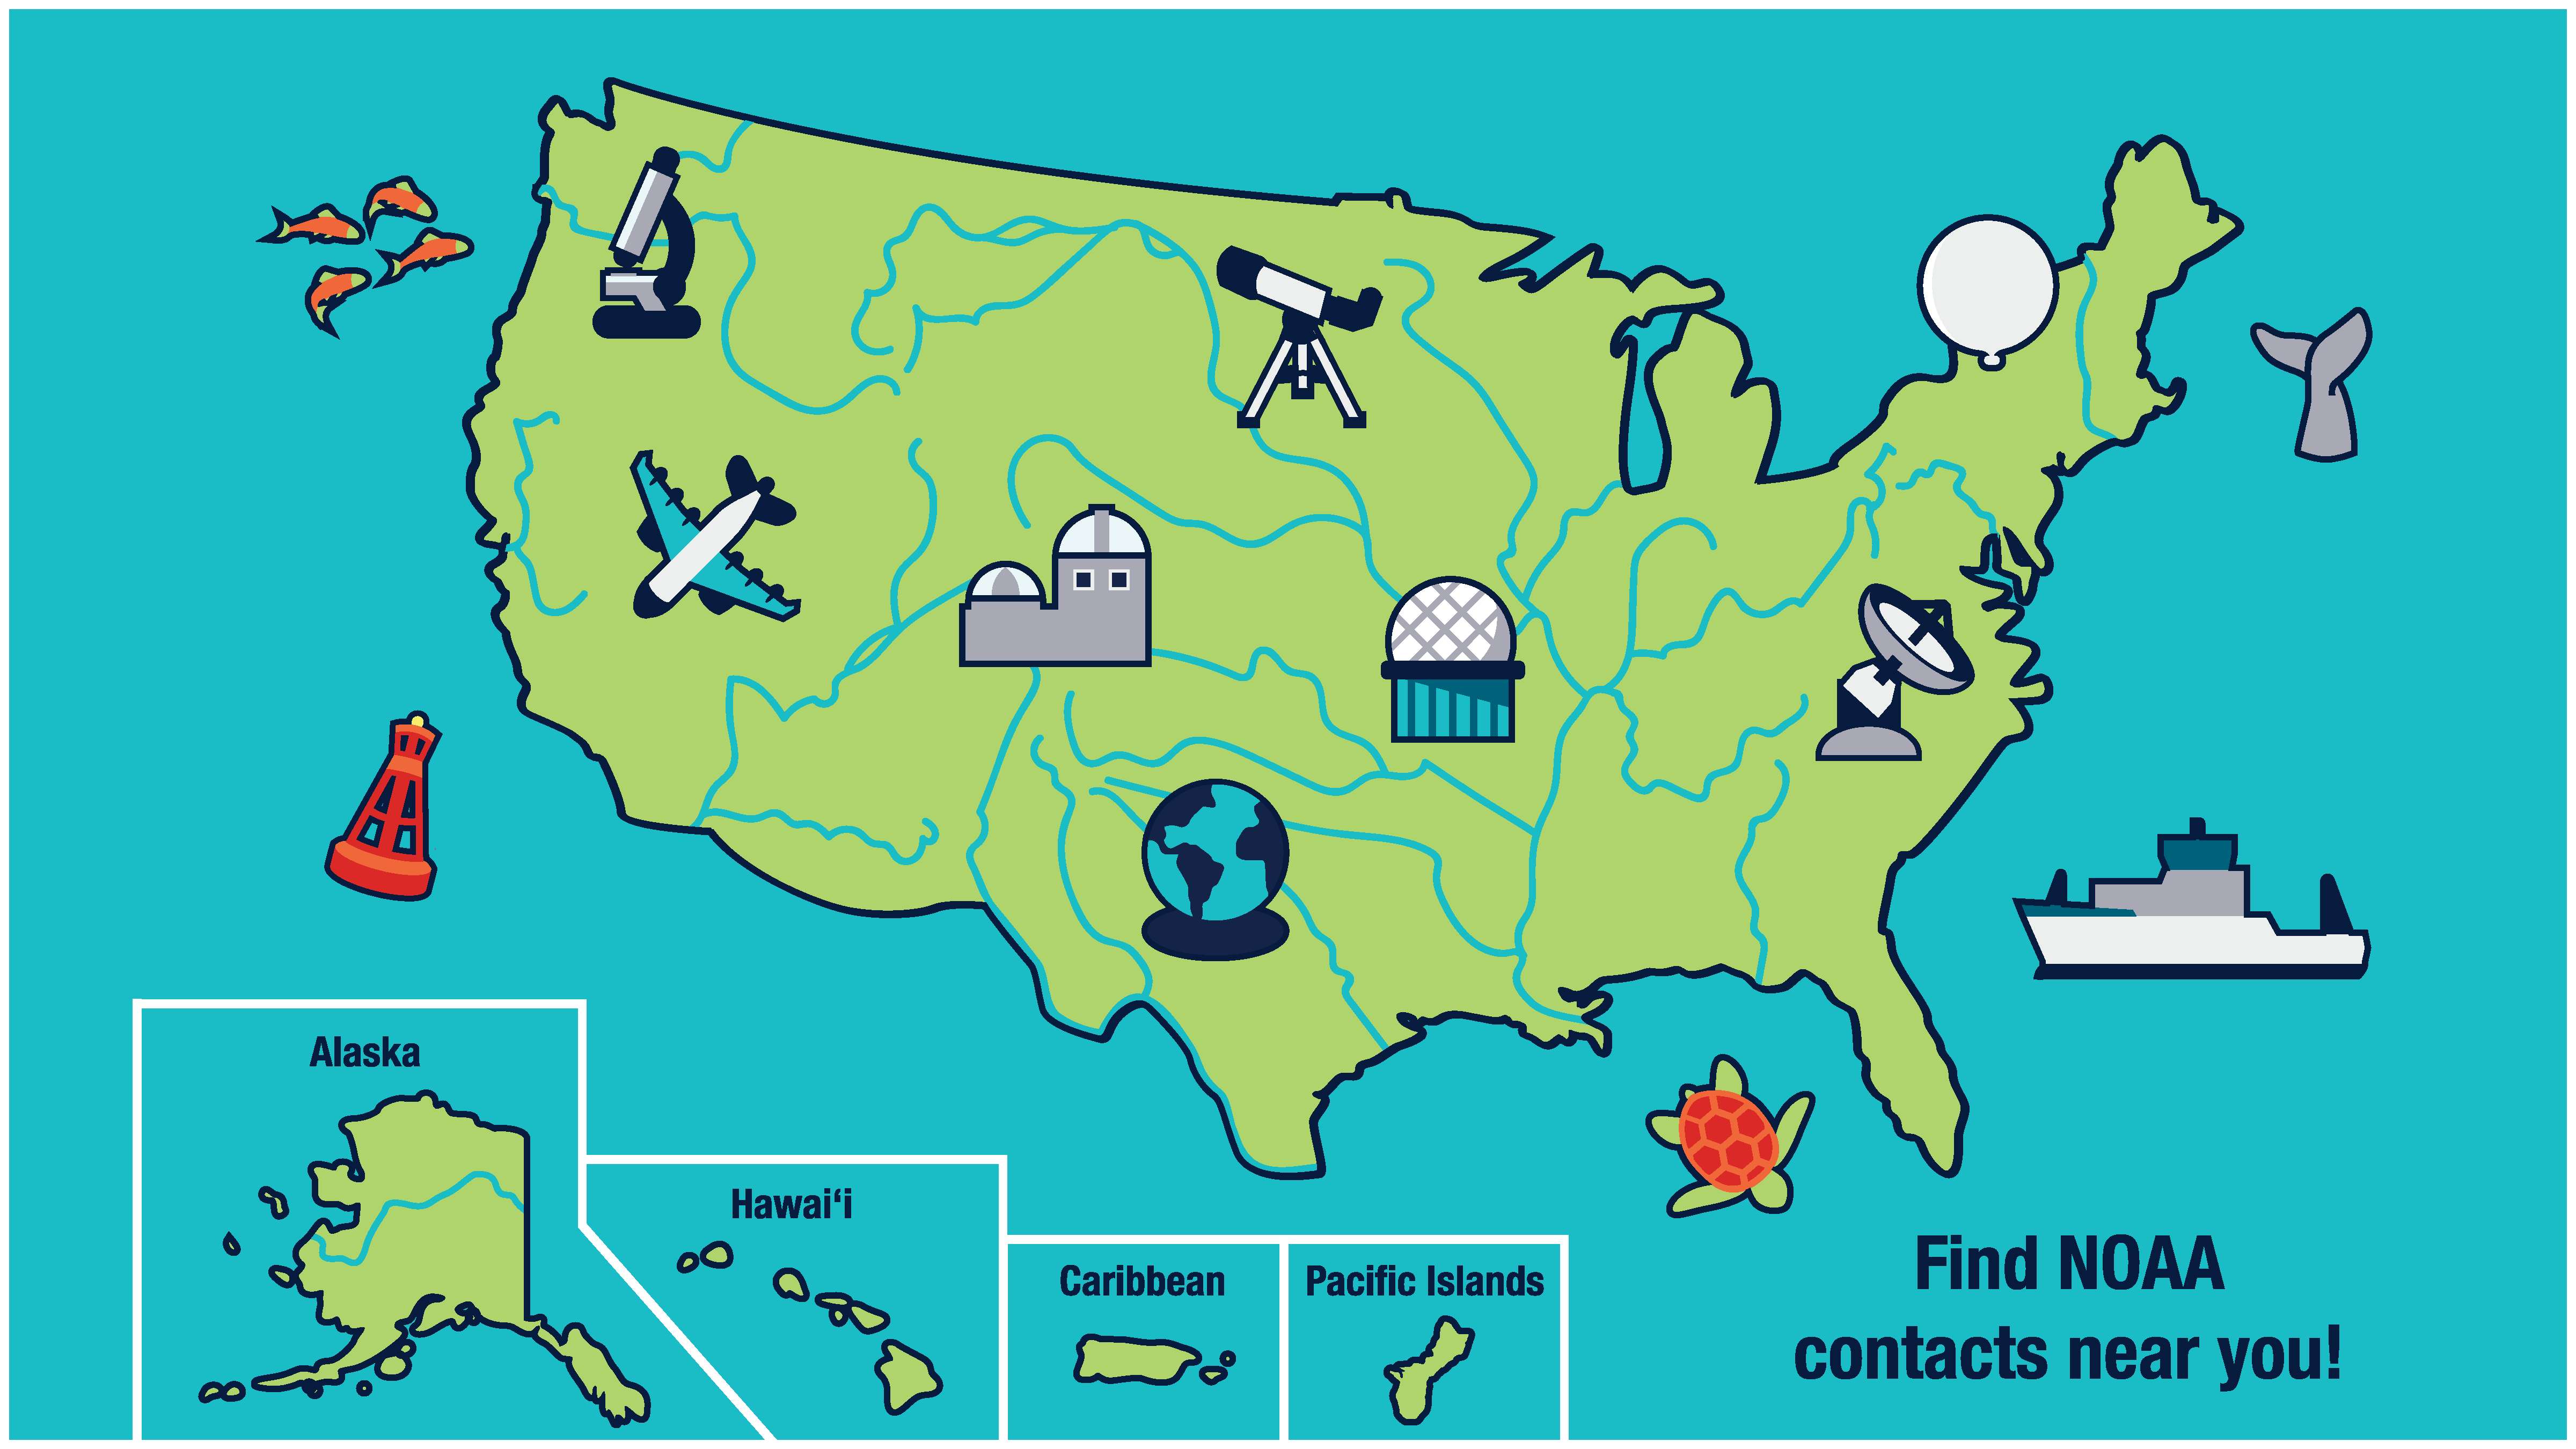 Postcard graphic with map showing NOAA-related icons including satellites, research vessels, fisheries, Science on a Sphere, and more symbolizing NOAA facilities and professional communicators across all 50 United States, Washington, D.C., and the U.S. territories. Find NOAA contacts near you at https://www.noaa.gov/education/noaa-in-your-backyard.